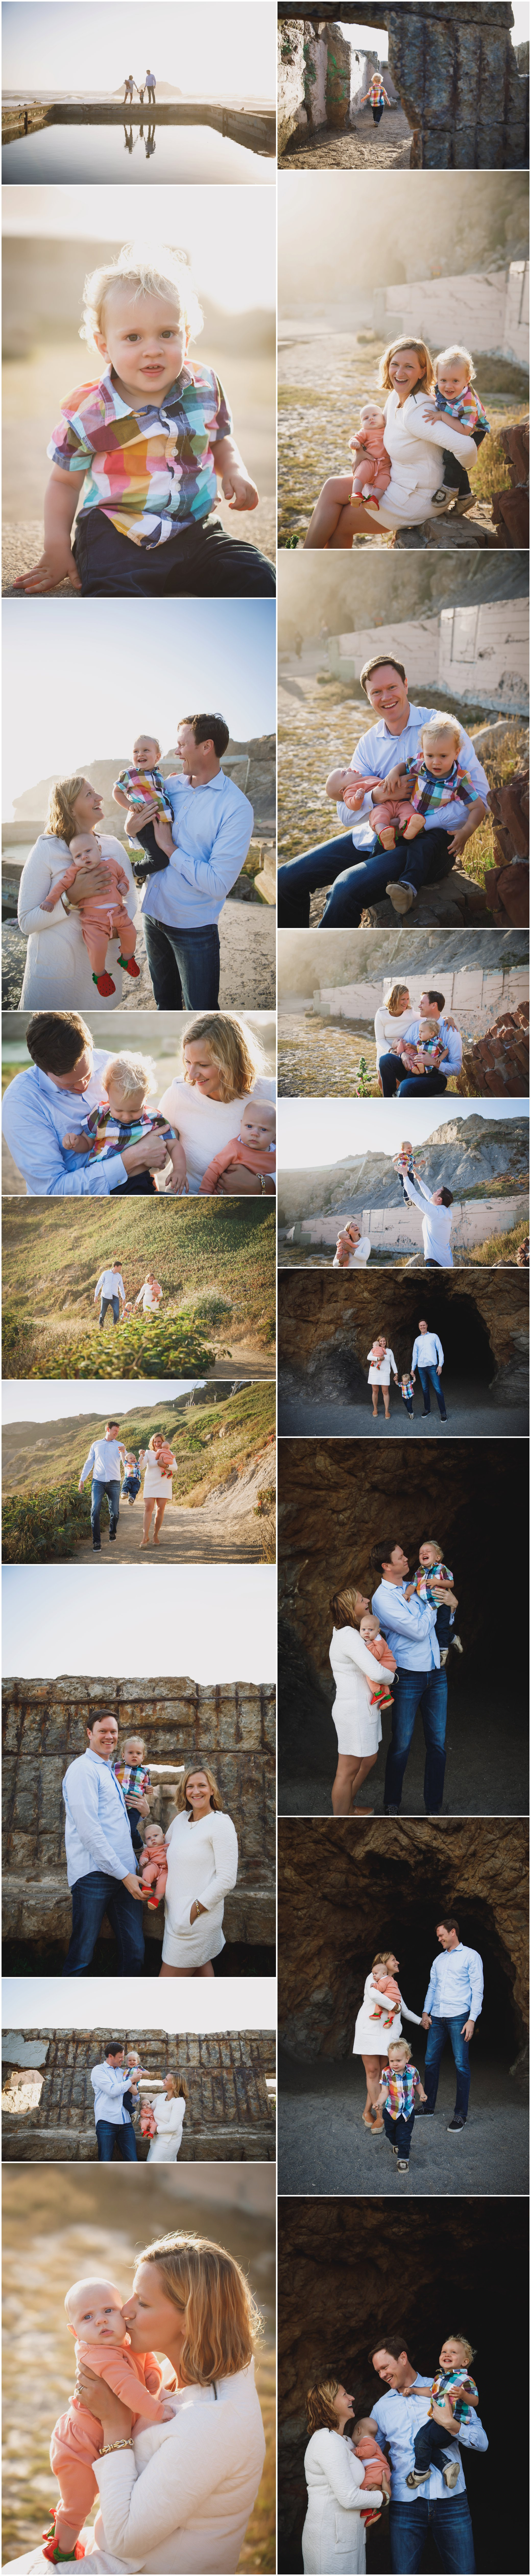 Family Photography Session by Award-Winning, Katie Rain Photography